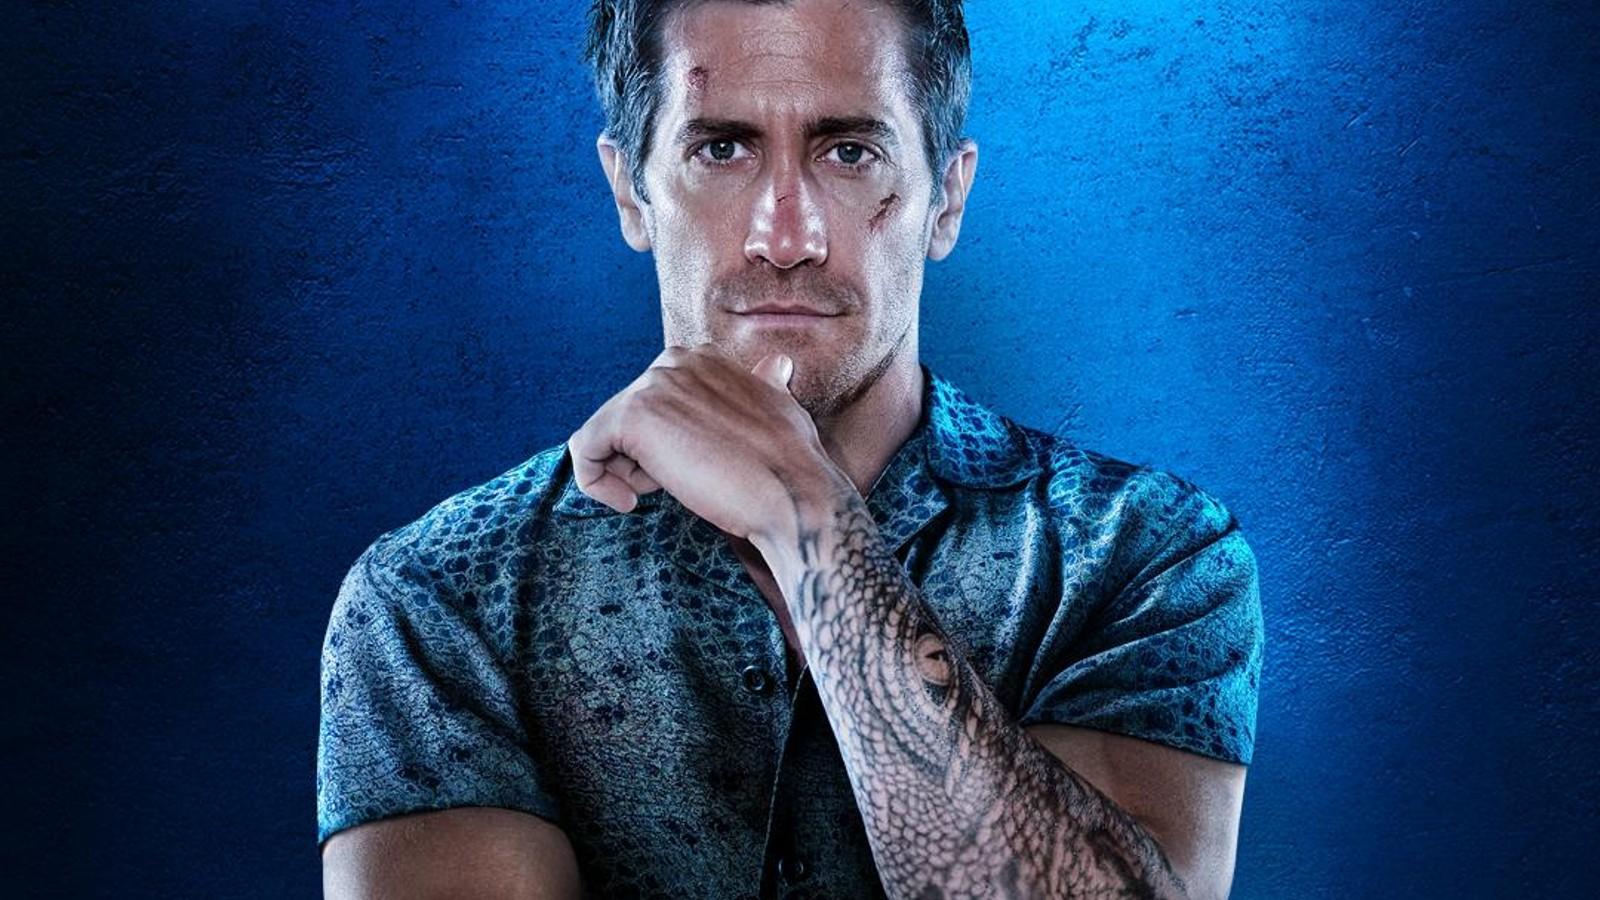 Jake Gyllenhaal with arms folded on the Road House poster.